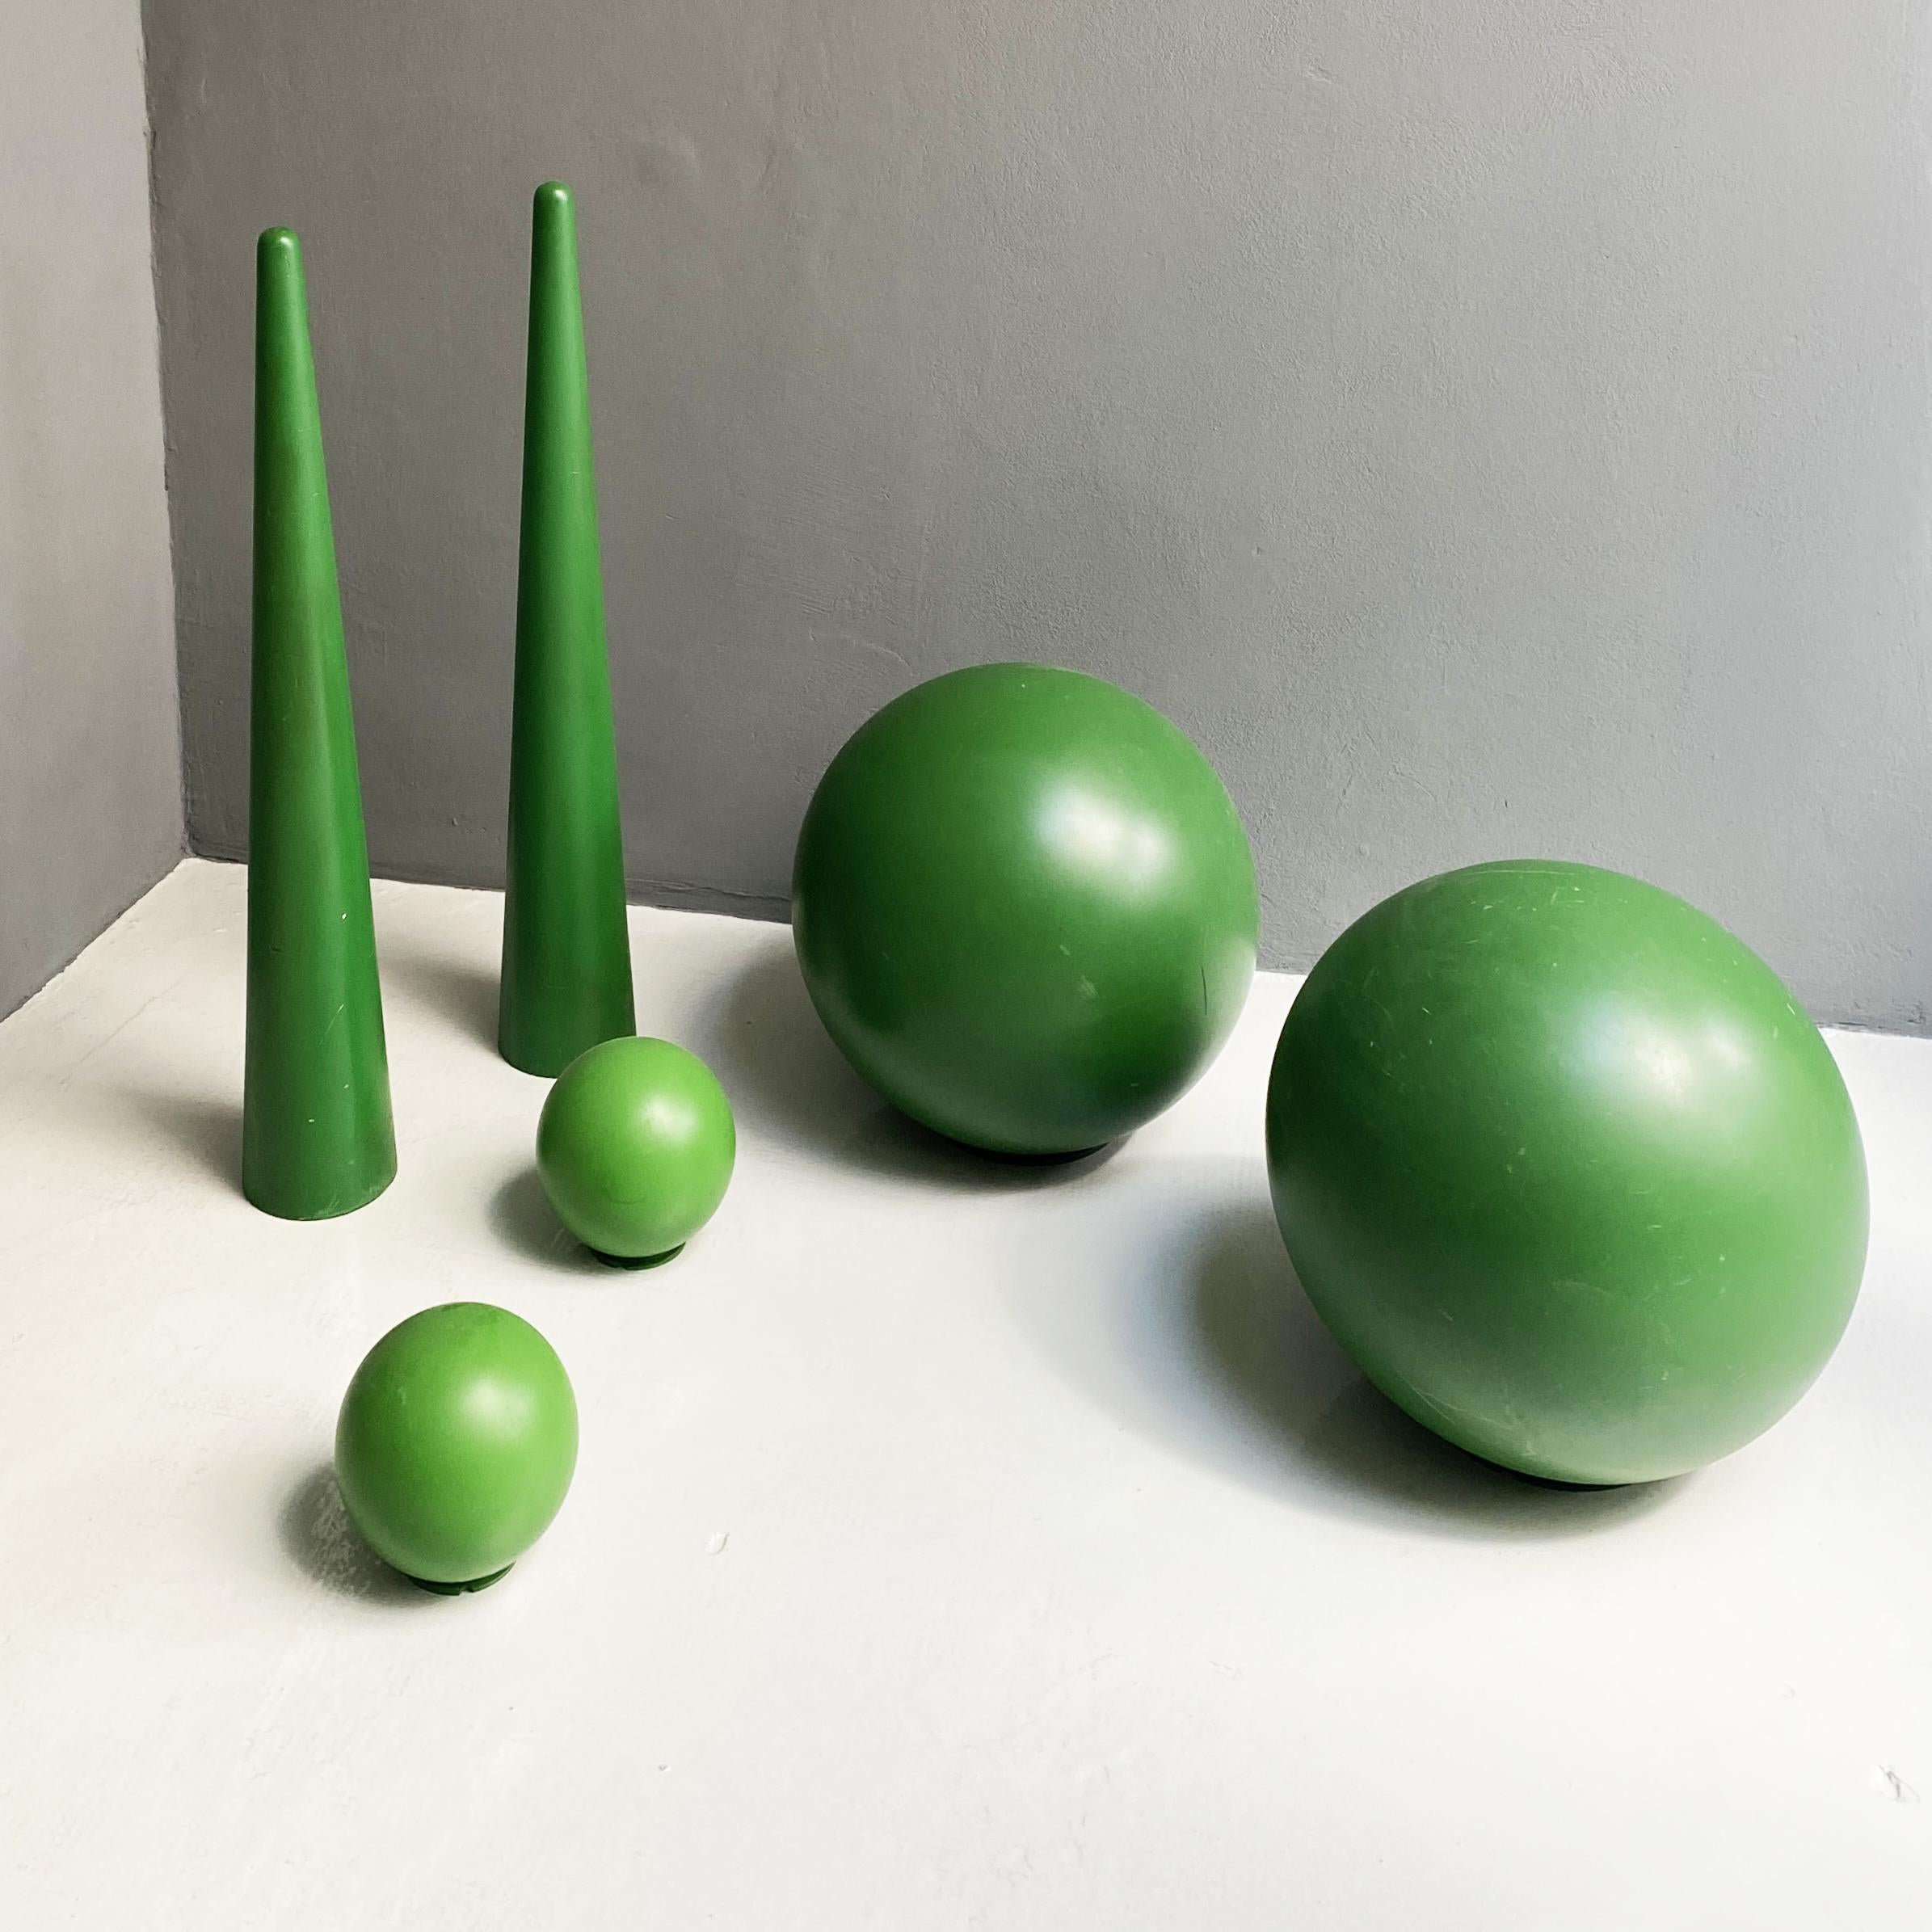 Italian Modern Green Plastic Props for Scenography, 1990s For Sale 2